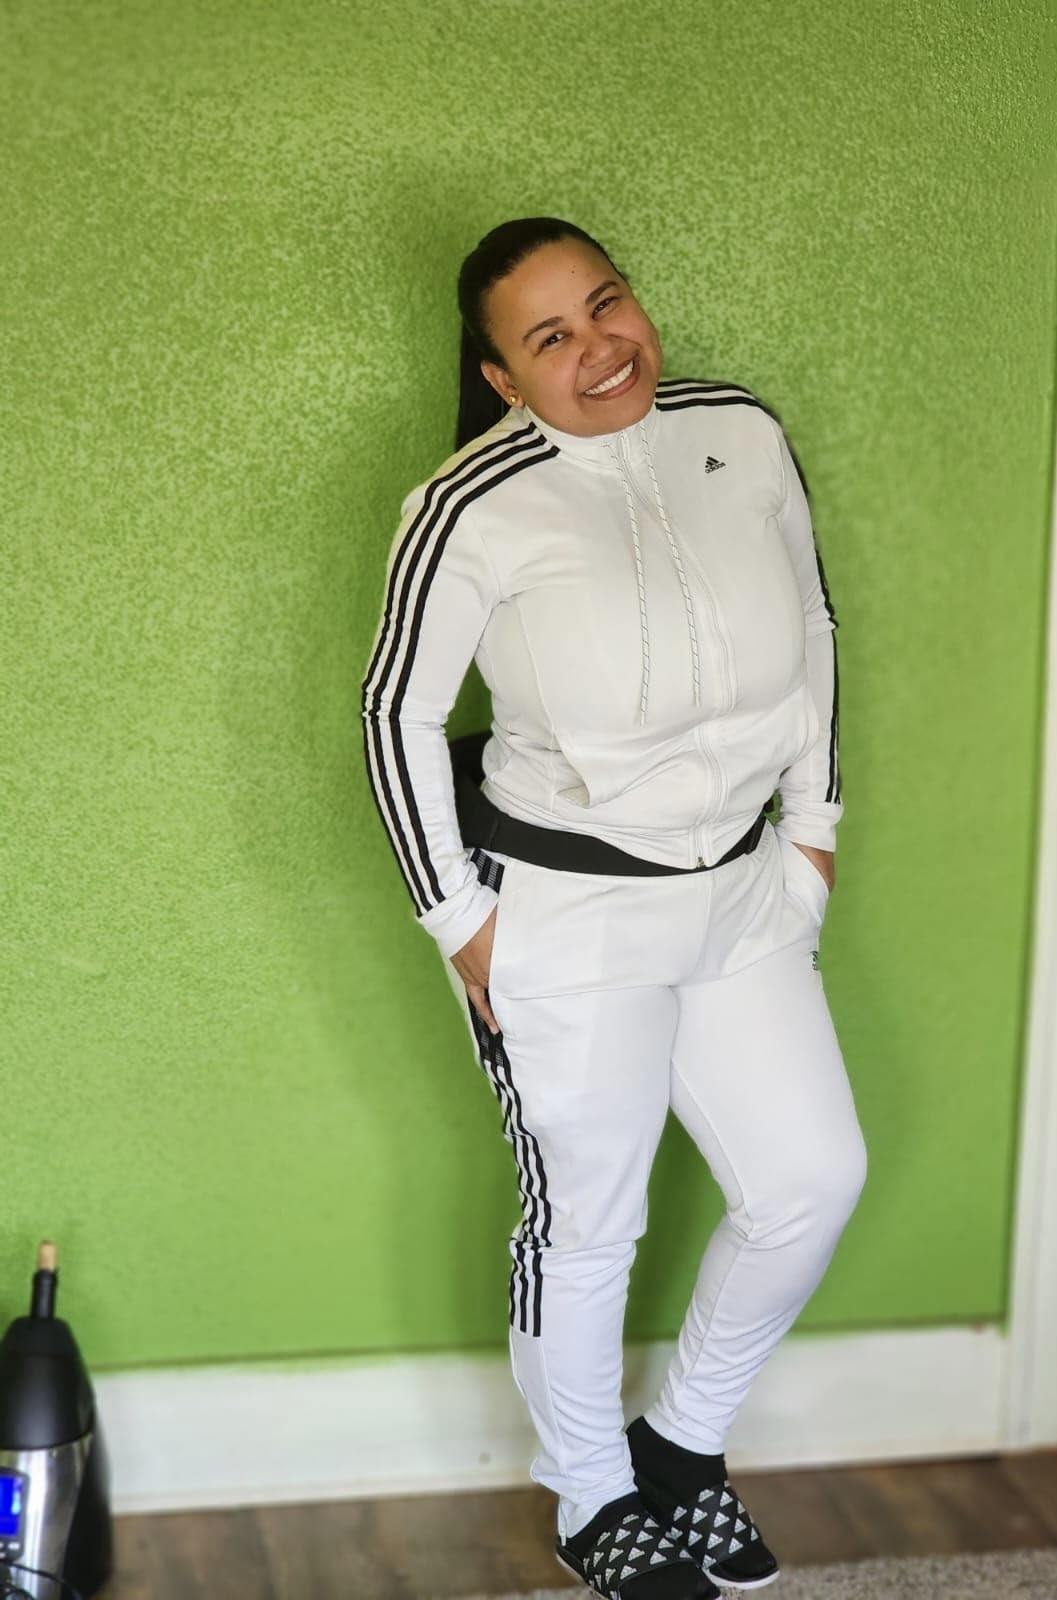 A reviewer in a white Adidas tracksuit with stripes, leaning against a green wall, smiling